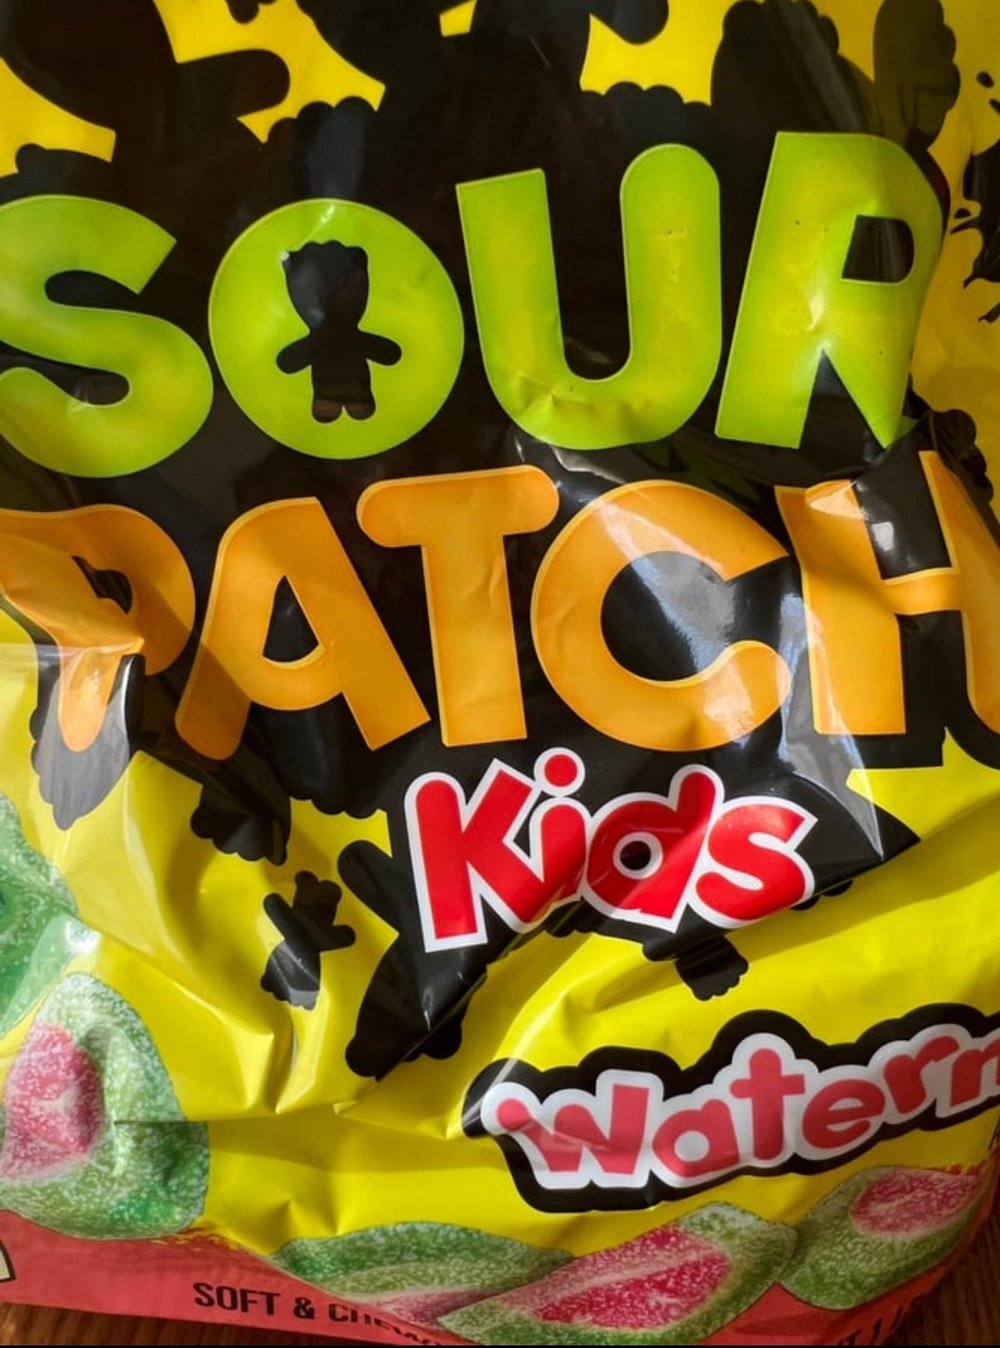 Image of Sour patch kids